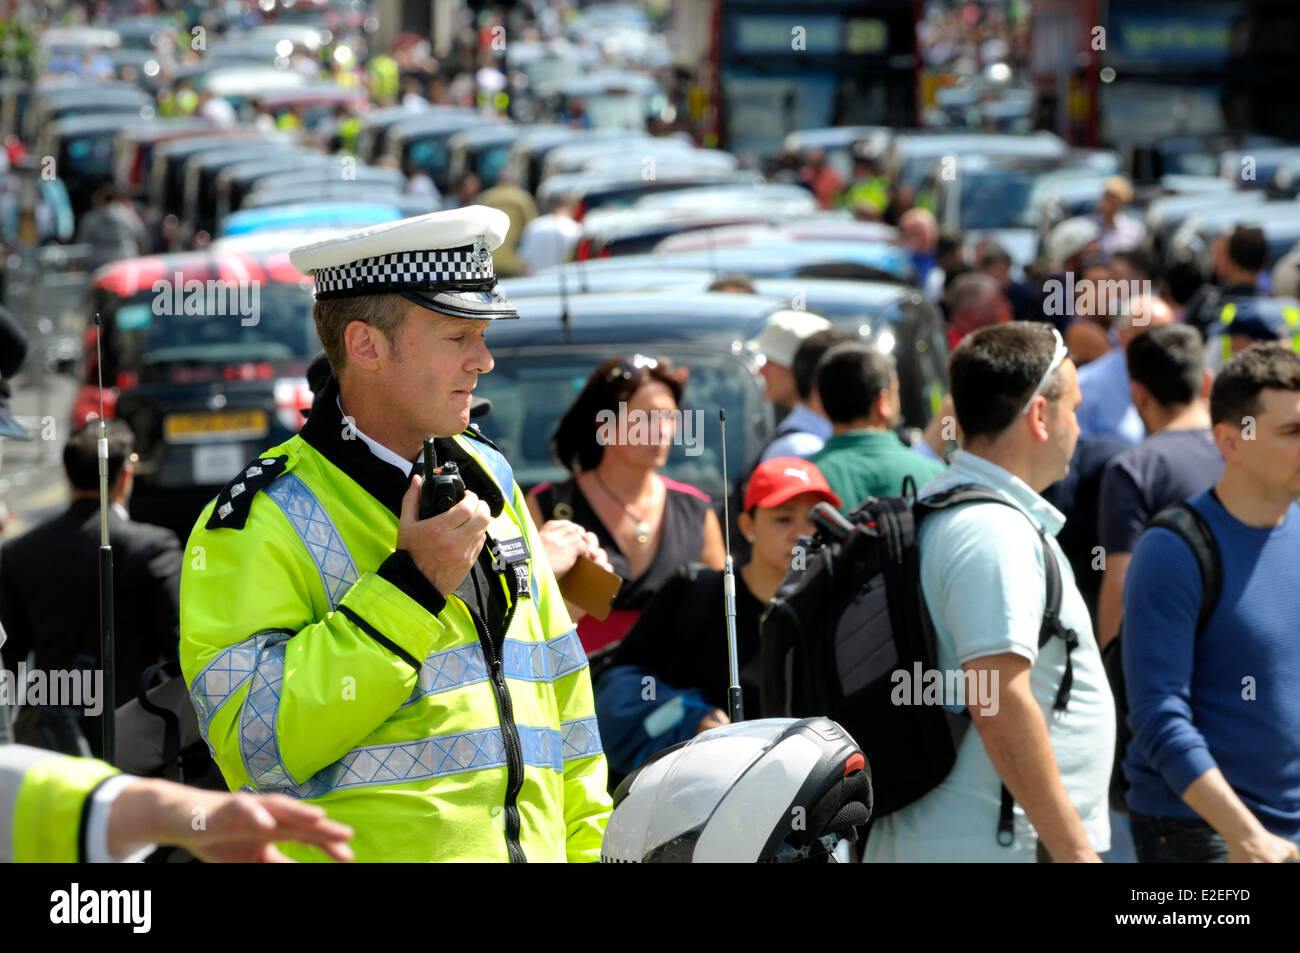 London, England, UK. Metropolitan police officers on duty during a taxi drivers' protest in central London, June 11, 2014 Stock Photo